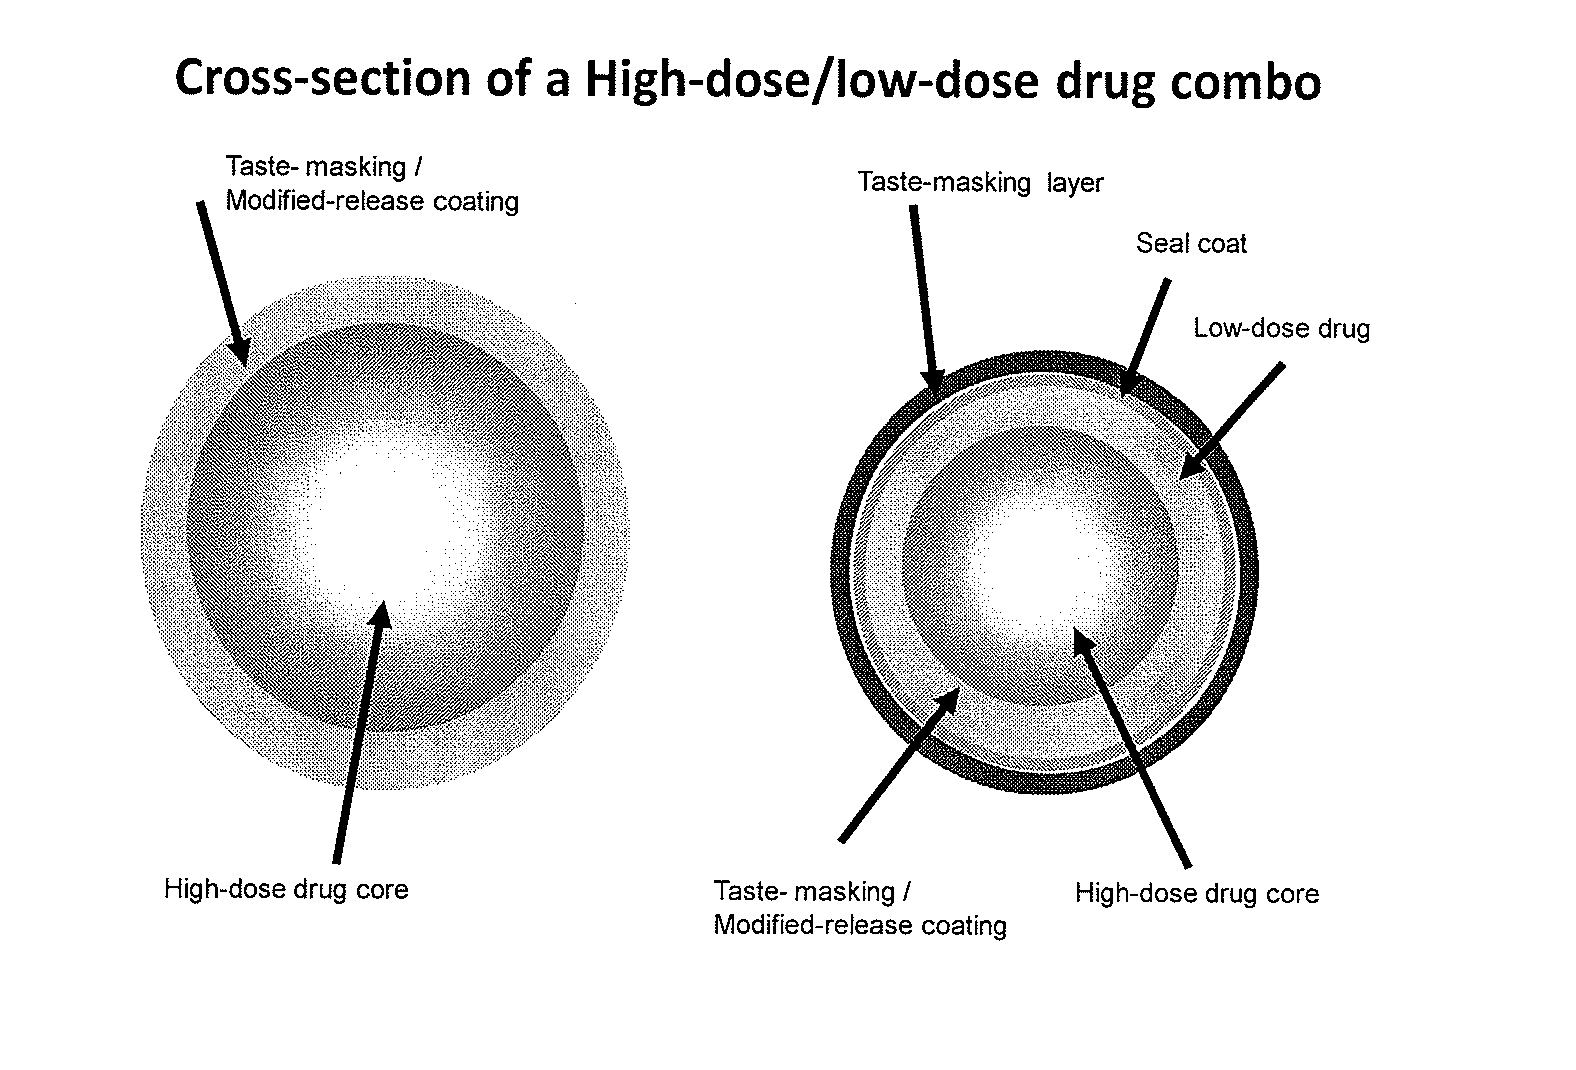 Orally Disintegrating Tablet Compositions Comprising Combinations of High and Low-Dose Drugs